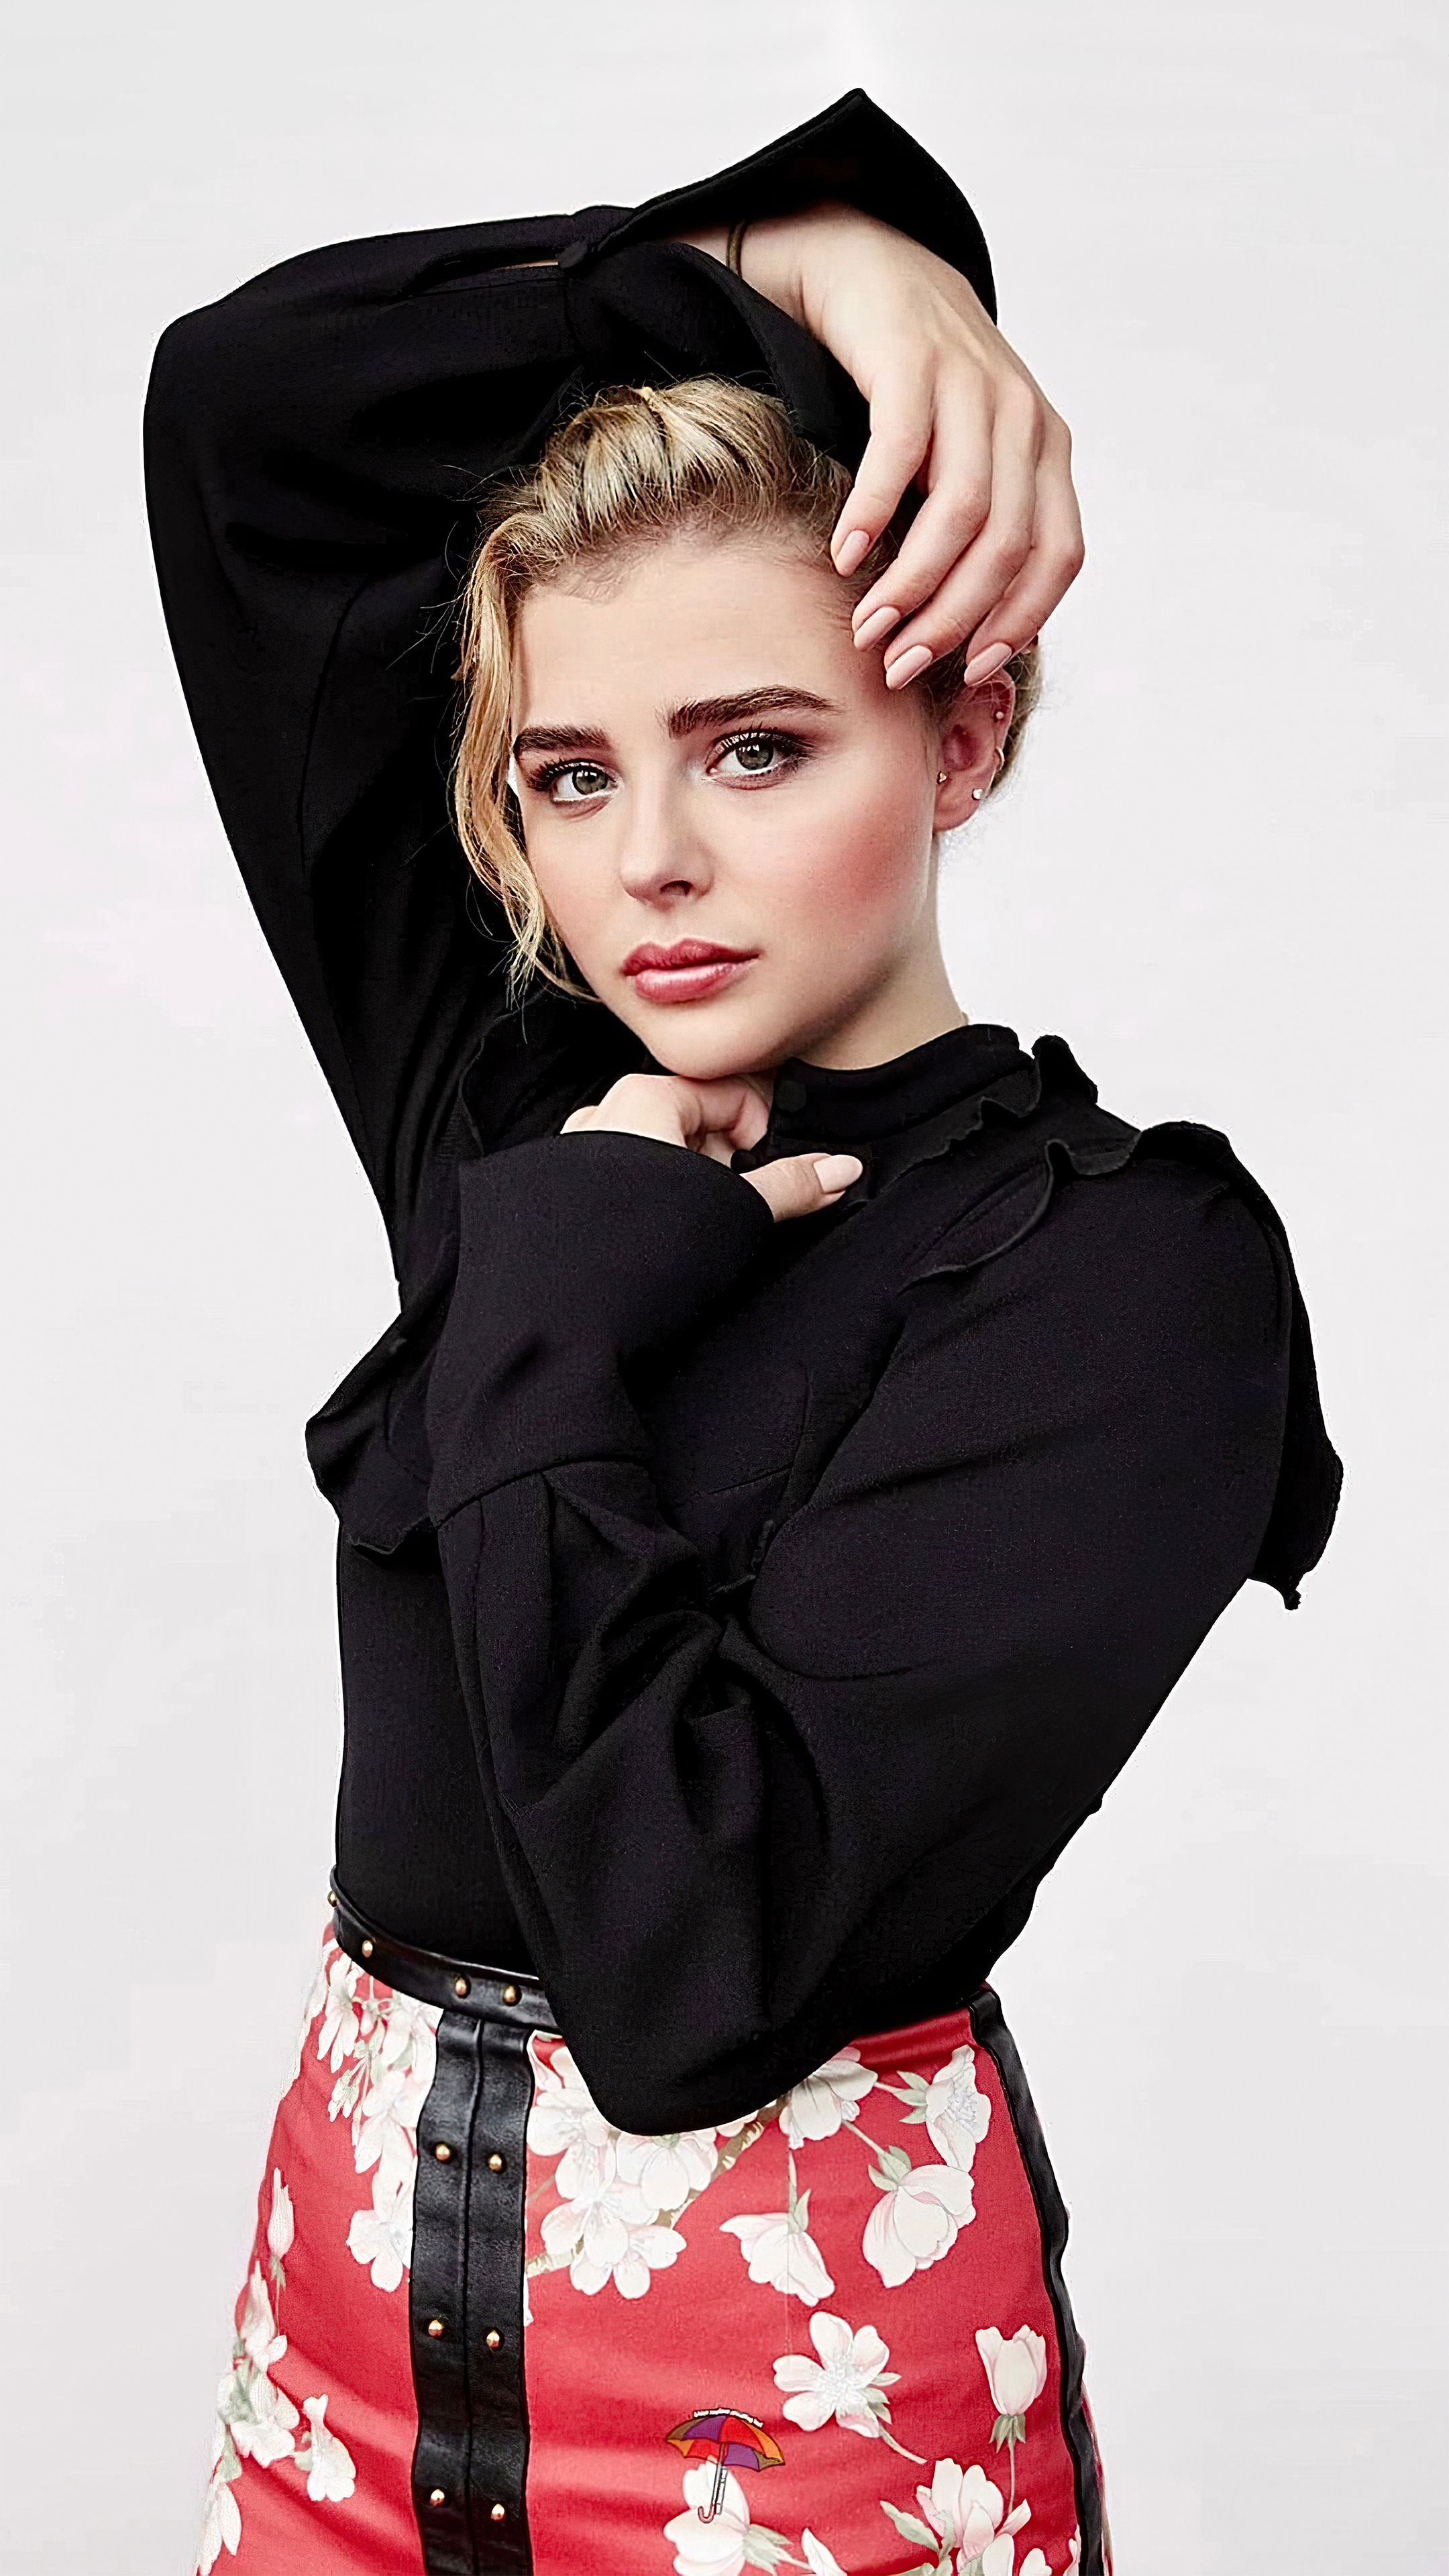 Chloe Moretz: Took part of Mia Hall in a 2014 teen romantic drama film, If I Stay. 2160x3840 4K Background.